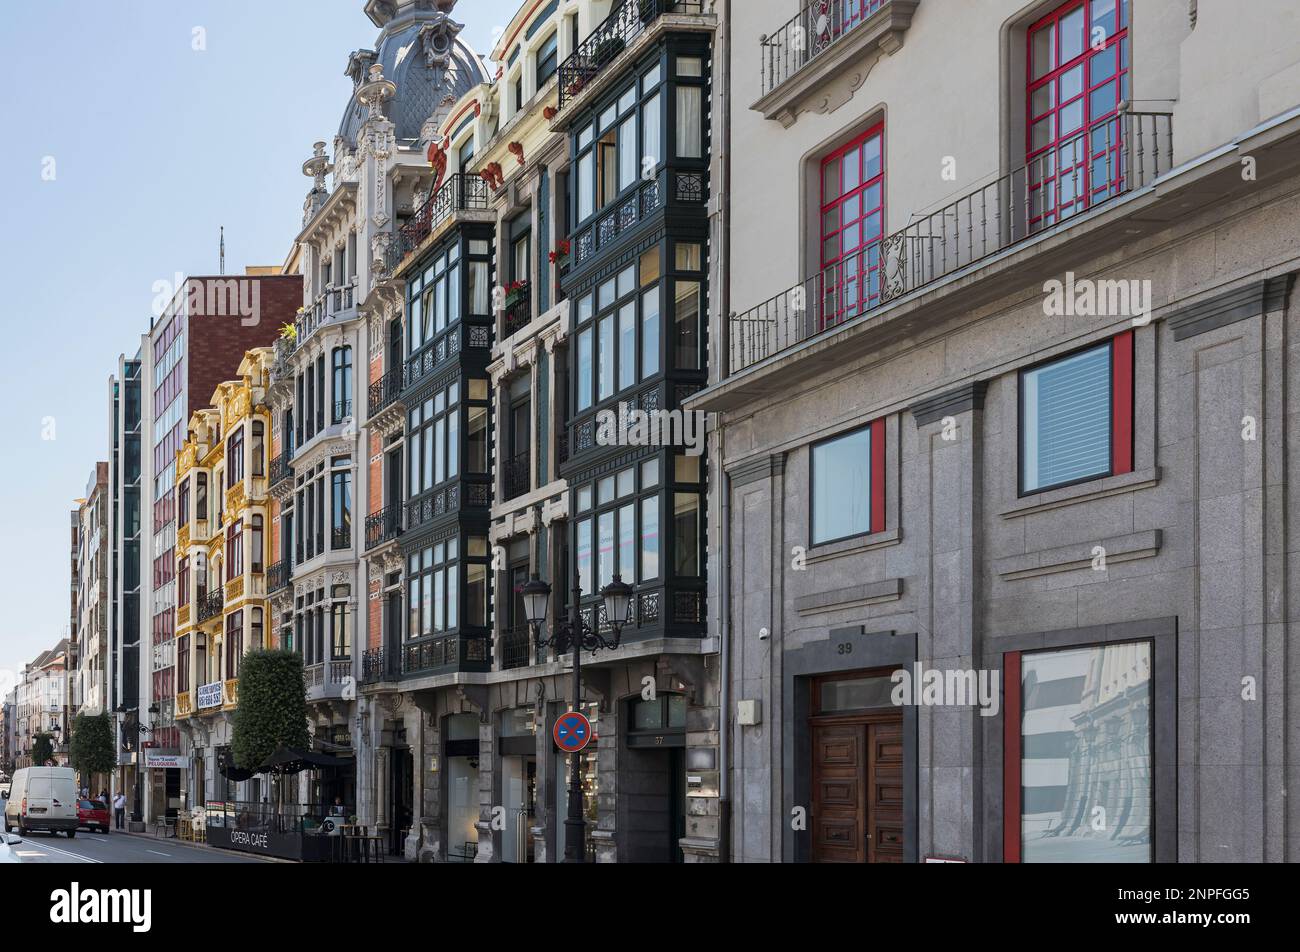 A lively and colorful plaza in the heart of Oviedo, Spain featuring beautiful Art Nouveau architecture from centuries past. Stock Photo